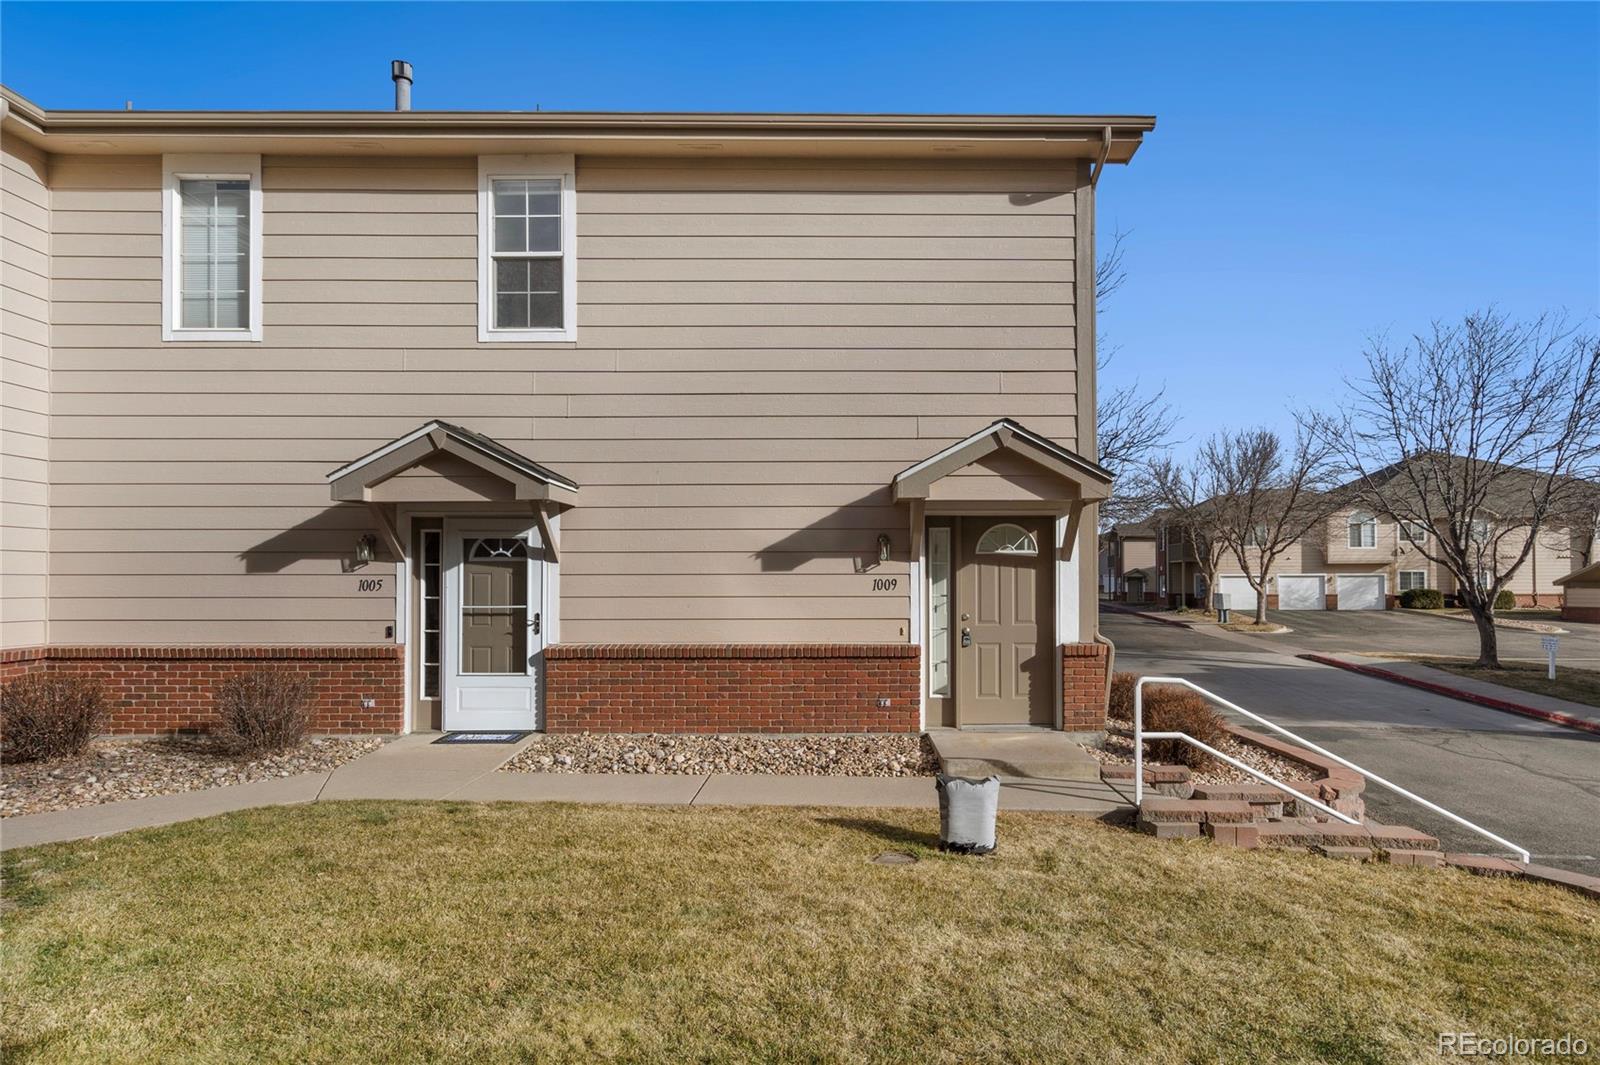 5151  29th street, Greeley sold home. Closed on 2024-04-01 for $250,000.